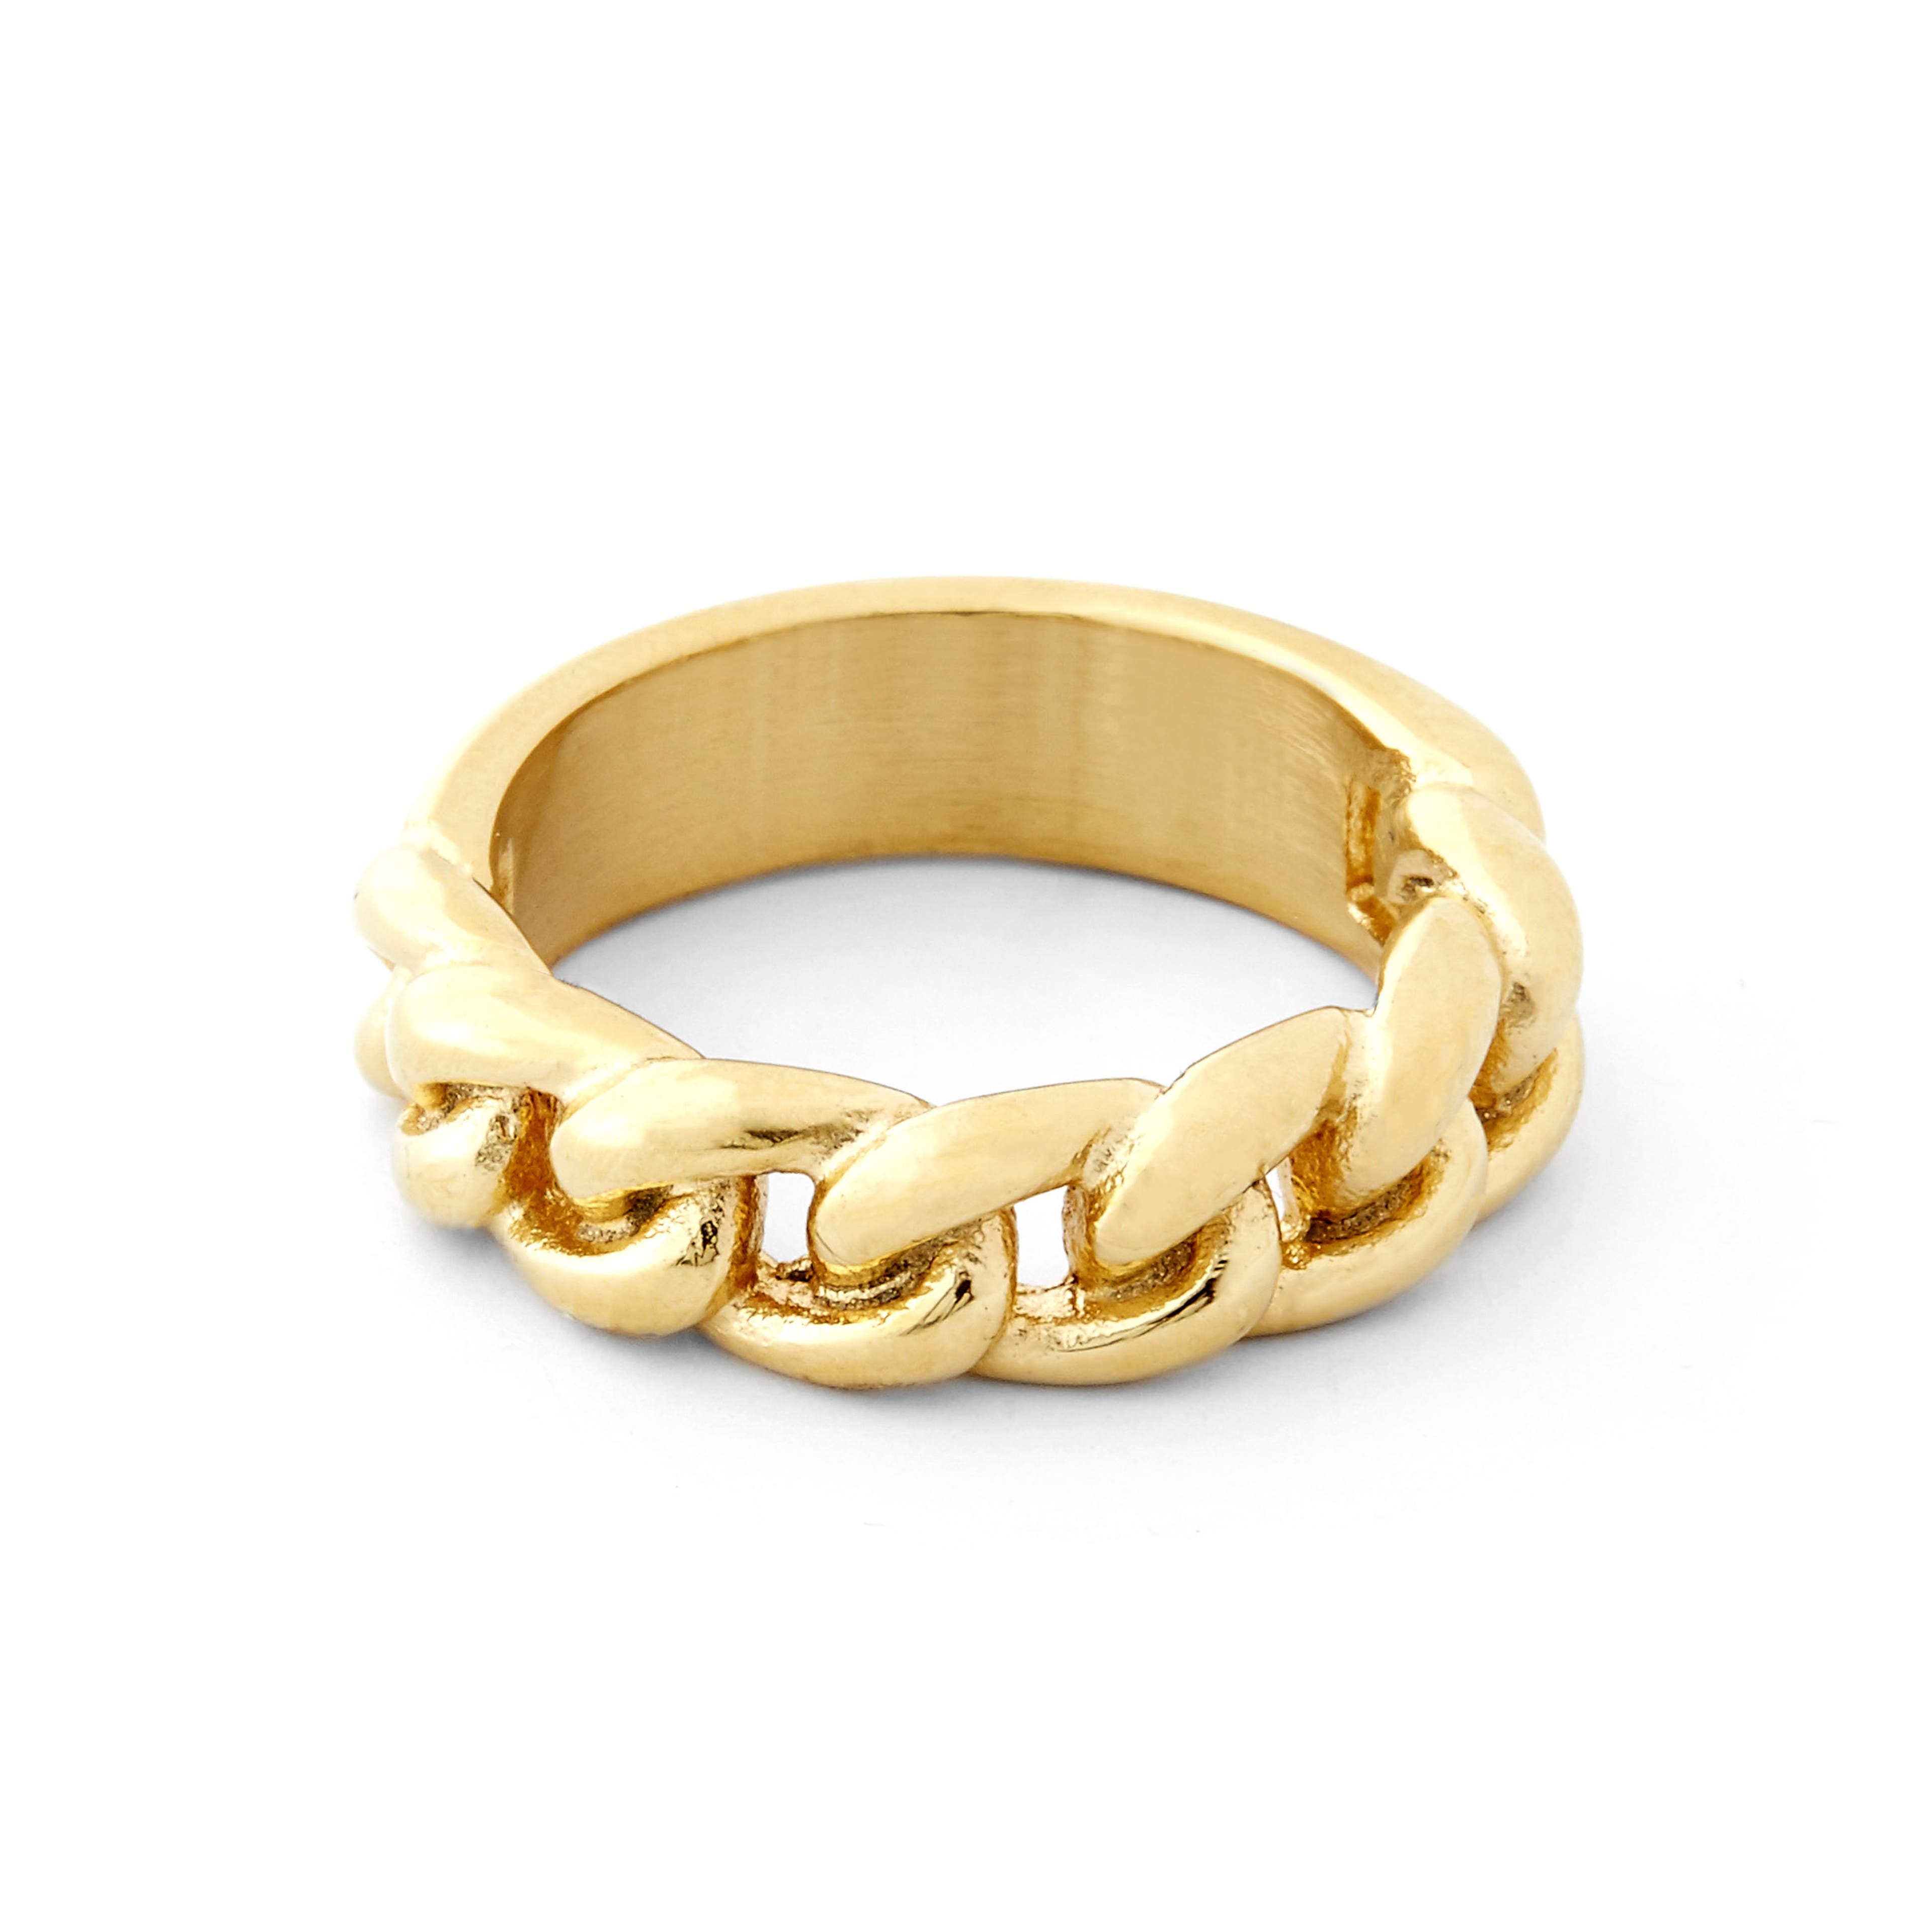 6 mm Gold-Tone With Half Chain Band Ring